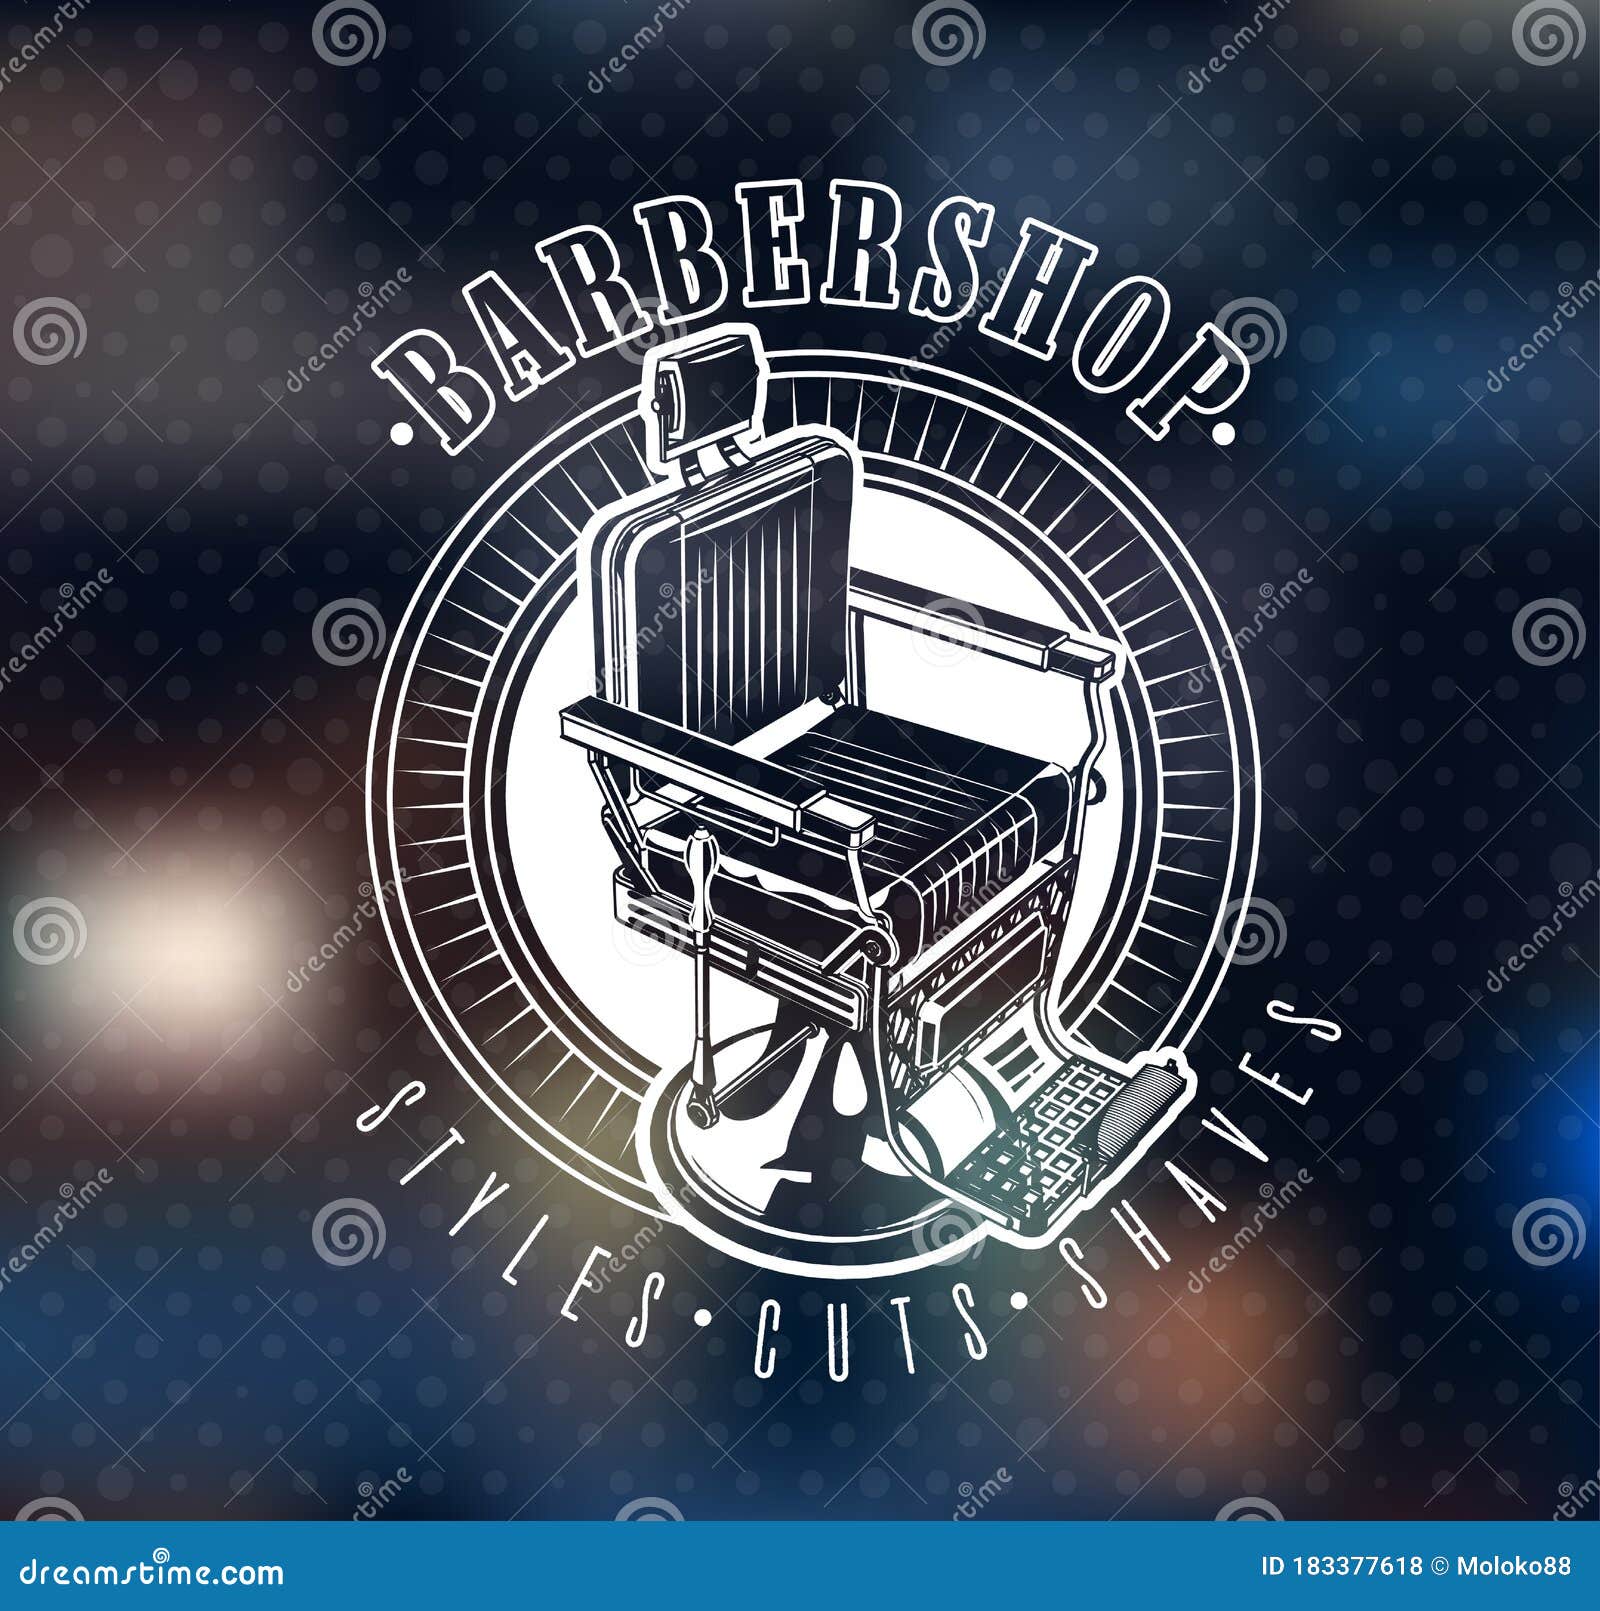 Barbershop Wall and Window Glass Sticker. Posters and Coverings To Decorate  a Barbershop Stock Vector - Illustration of gentleman, haircut: 183377618